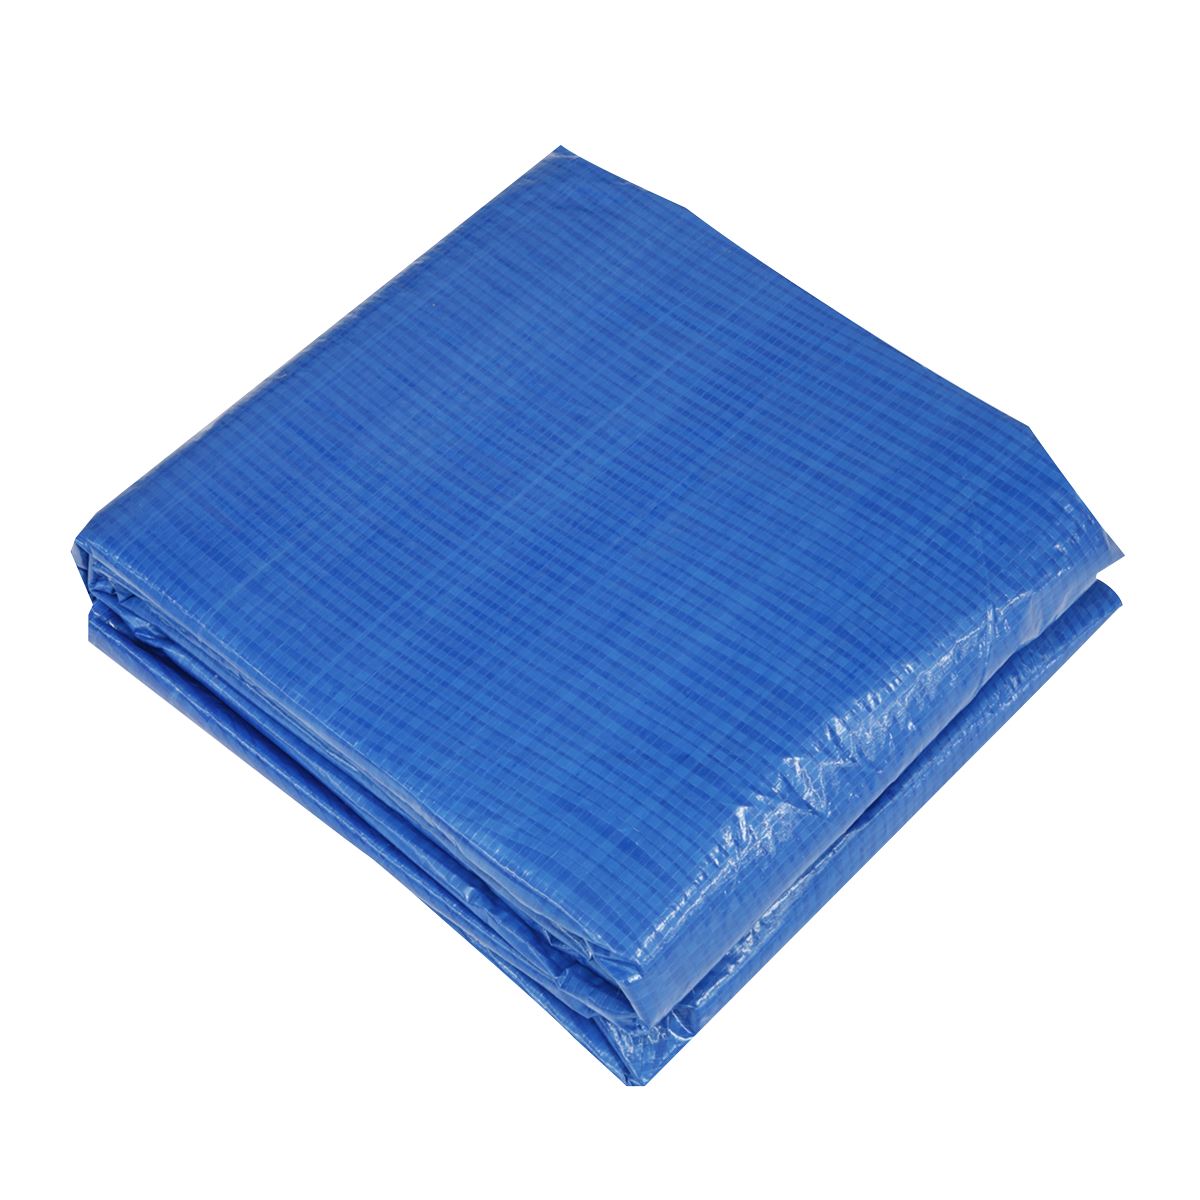 Dellonda Swimming Pool Top Cover with Rope Ties for DL18